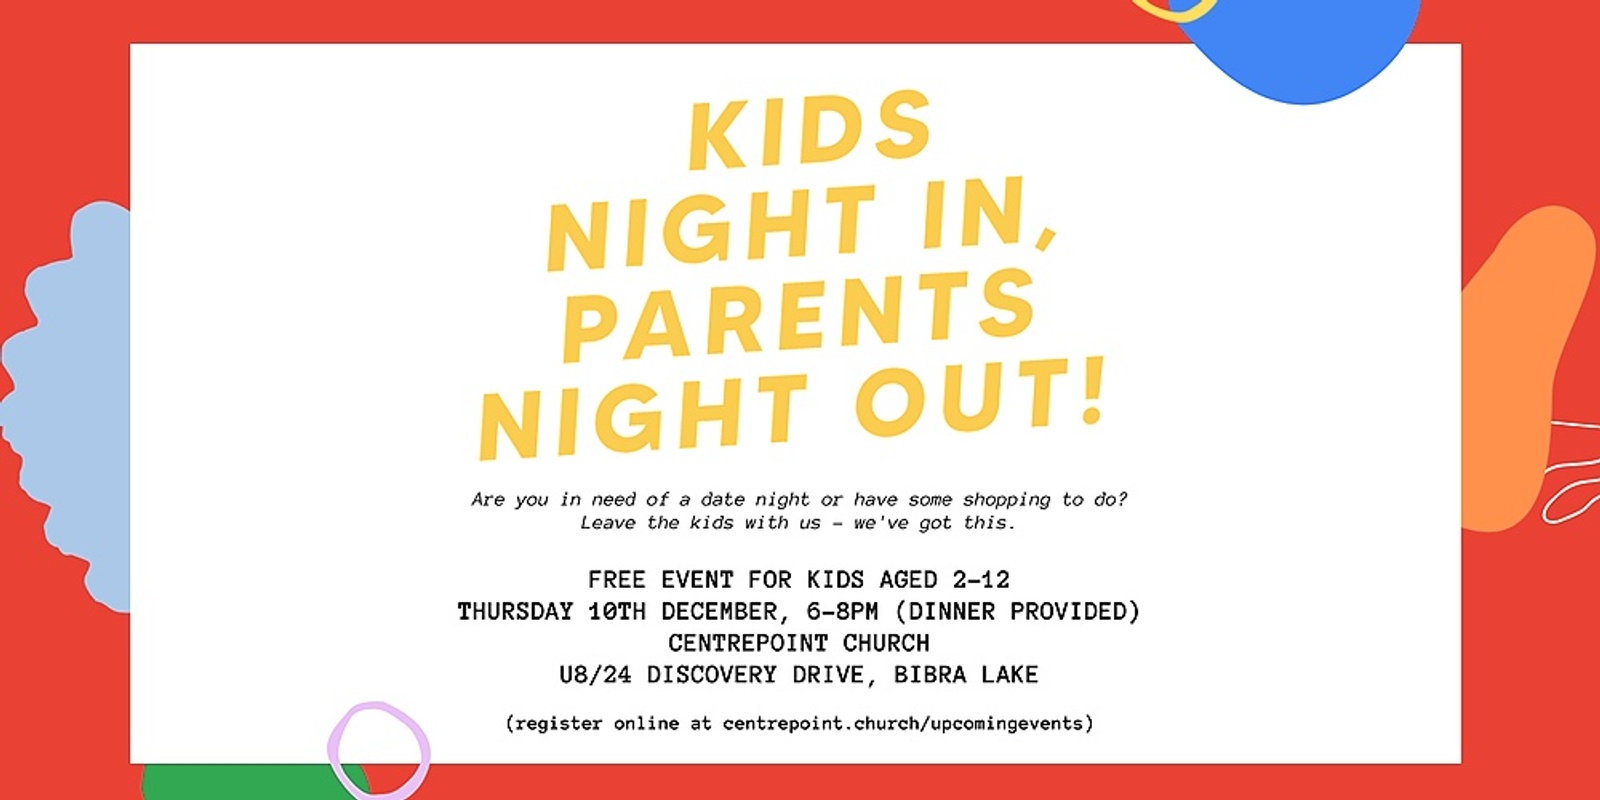 Banner image for Kids Night in, Parents Night Out!